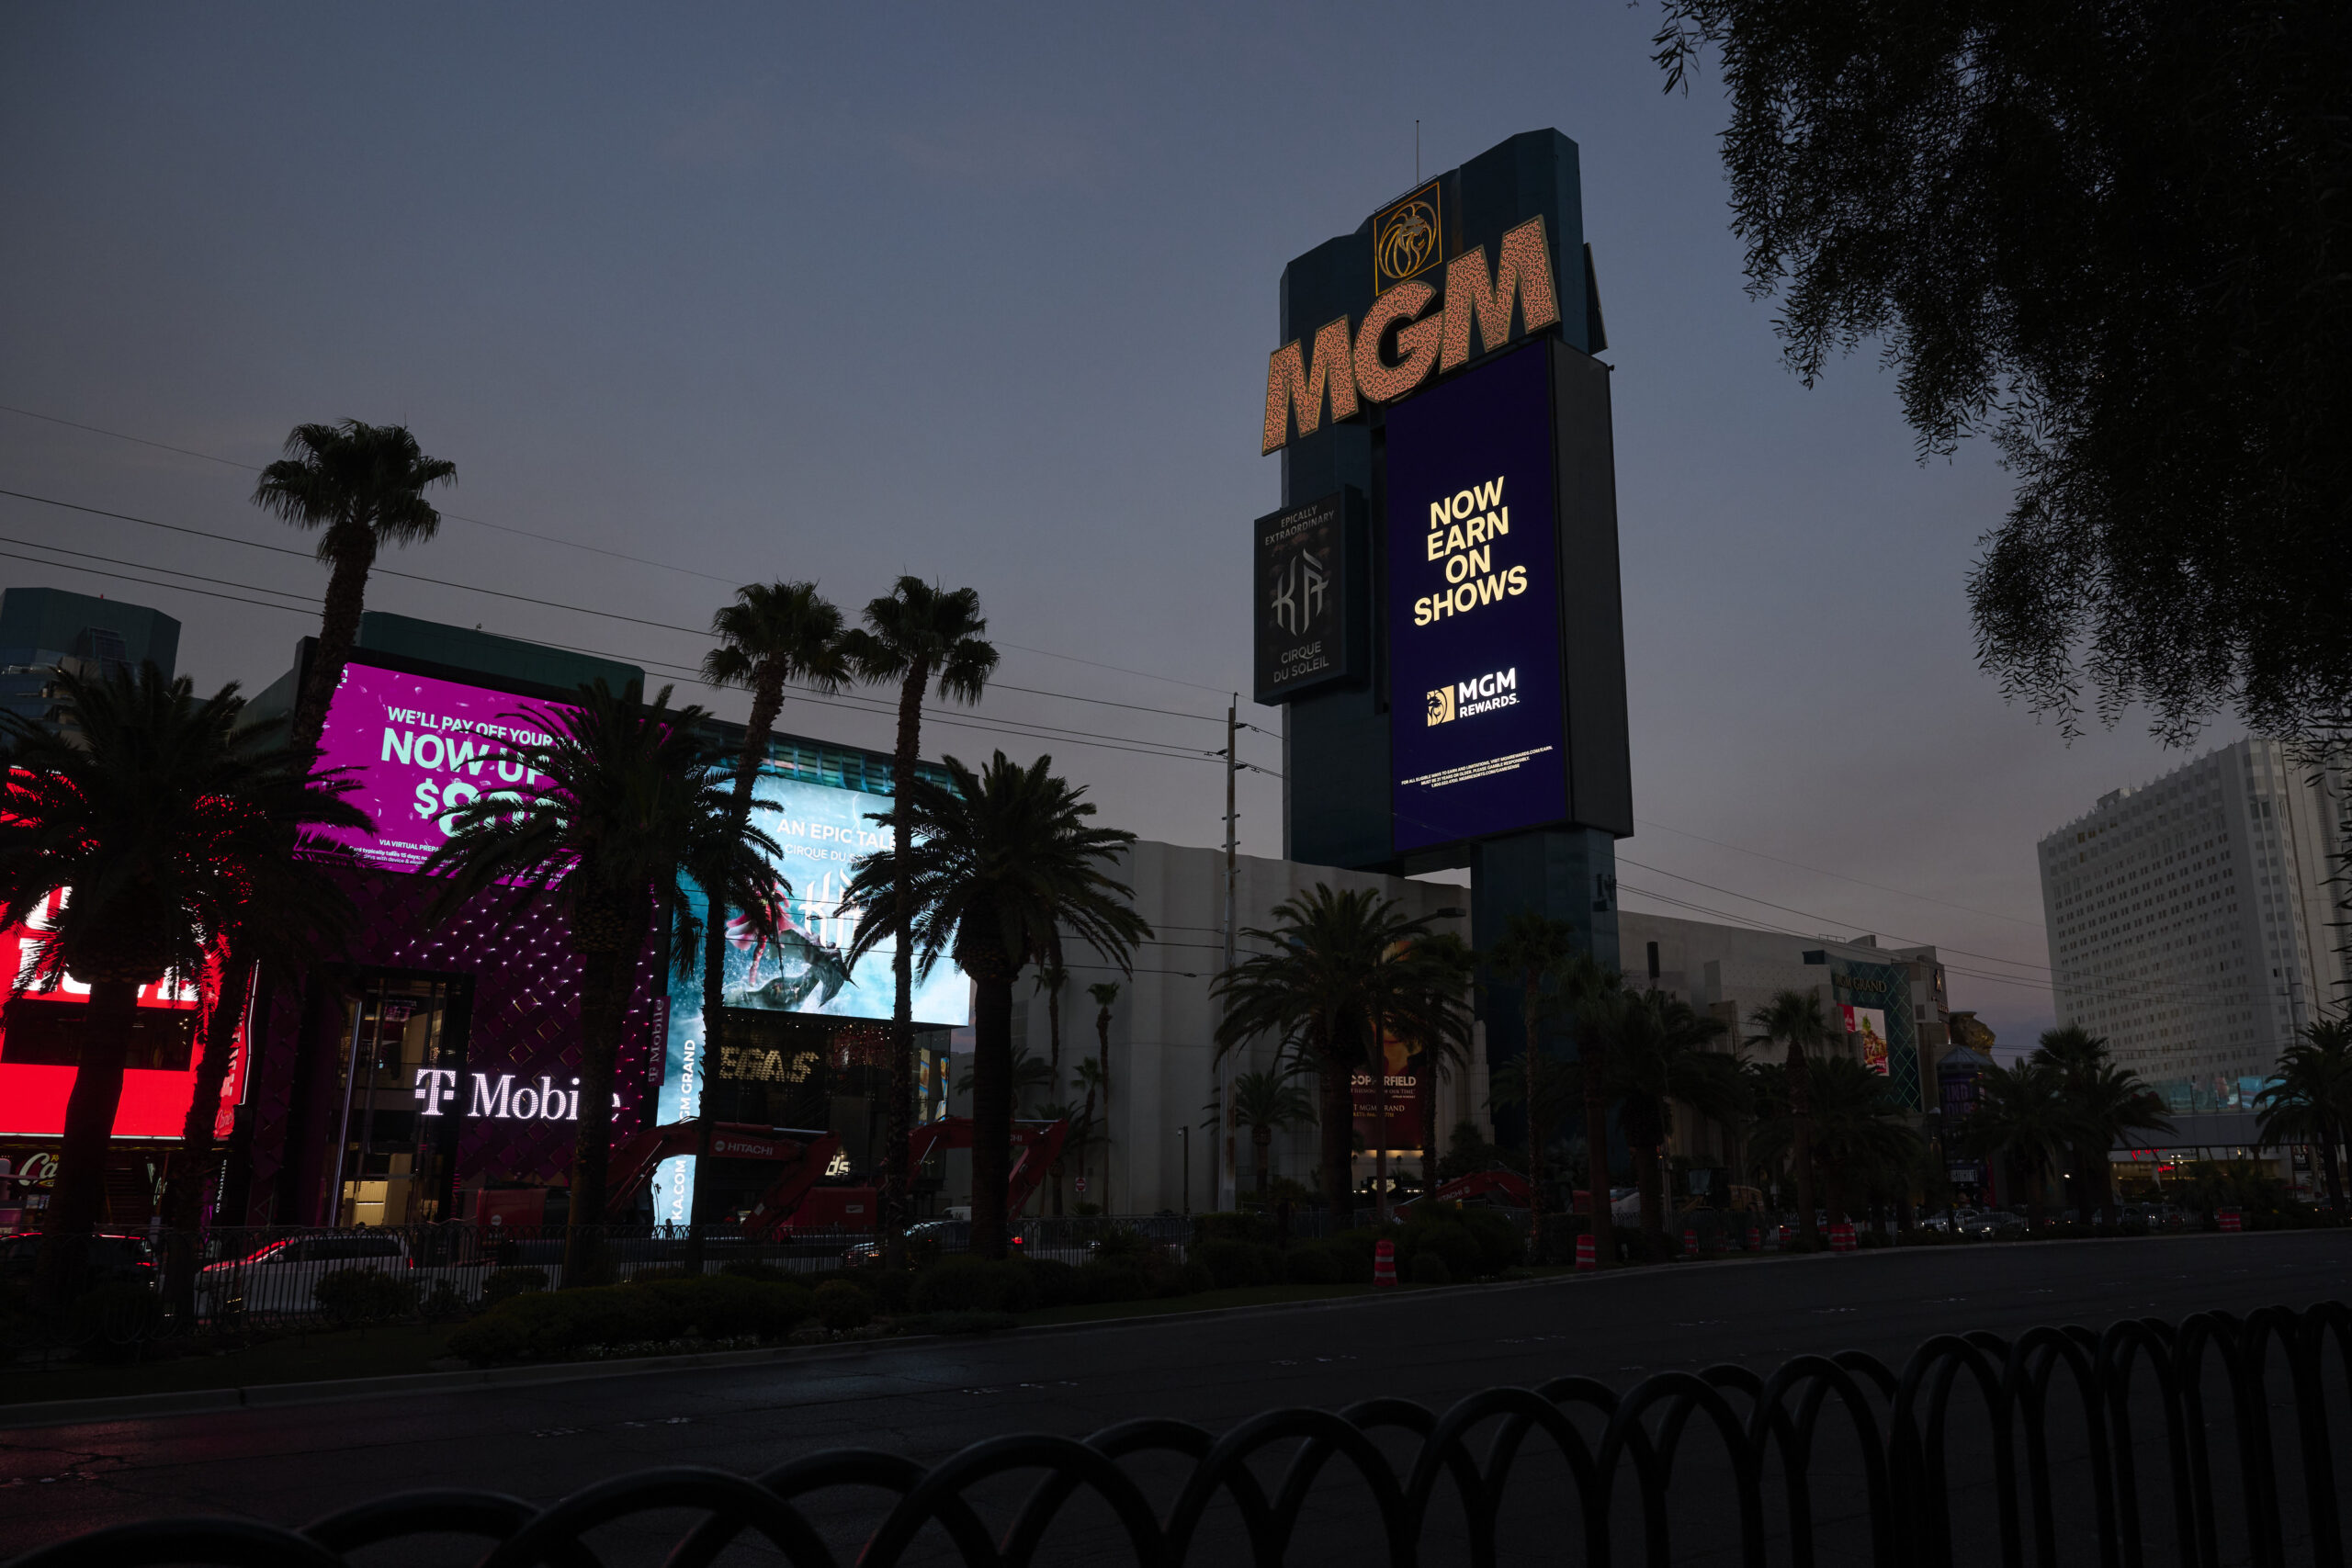 Las Vegas Casino Hack: How MGM Resorts Lost $100 Million to Cyber Thieves